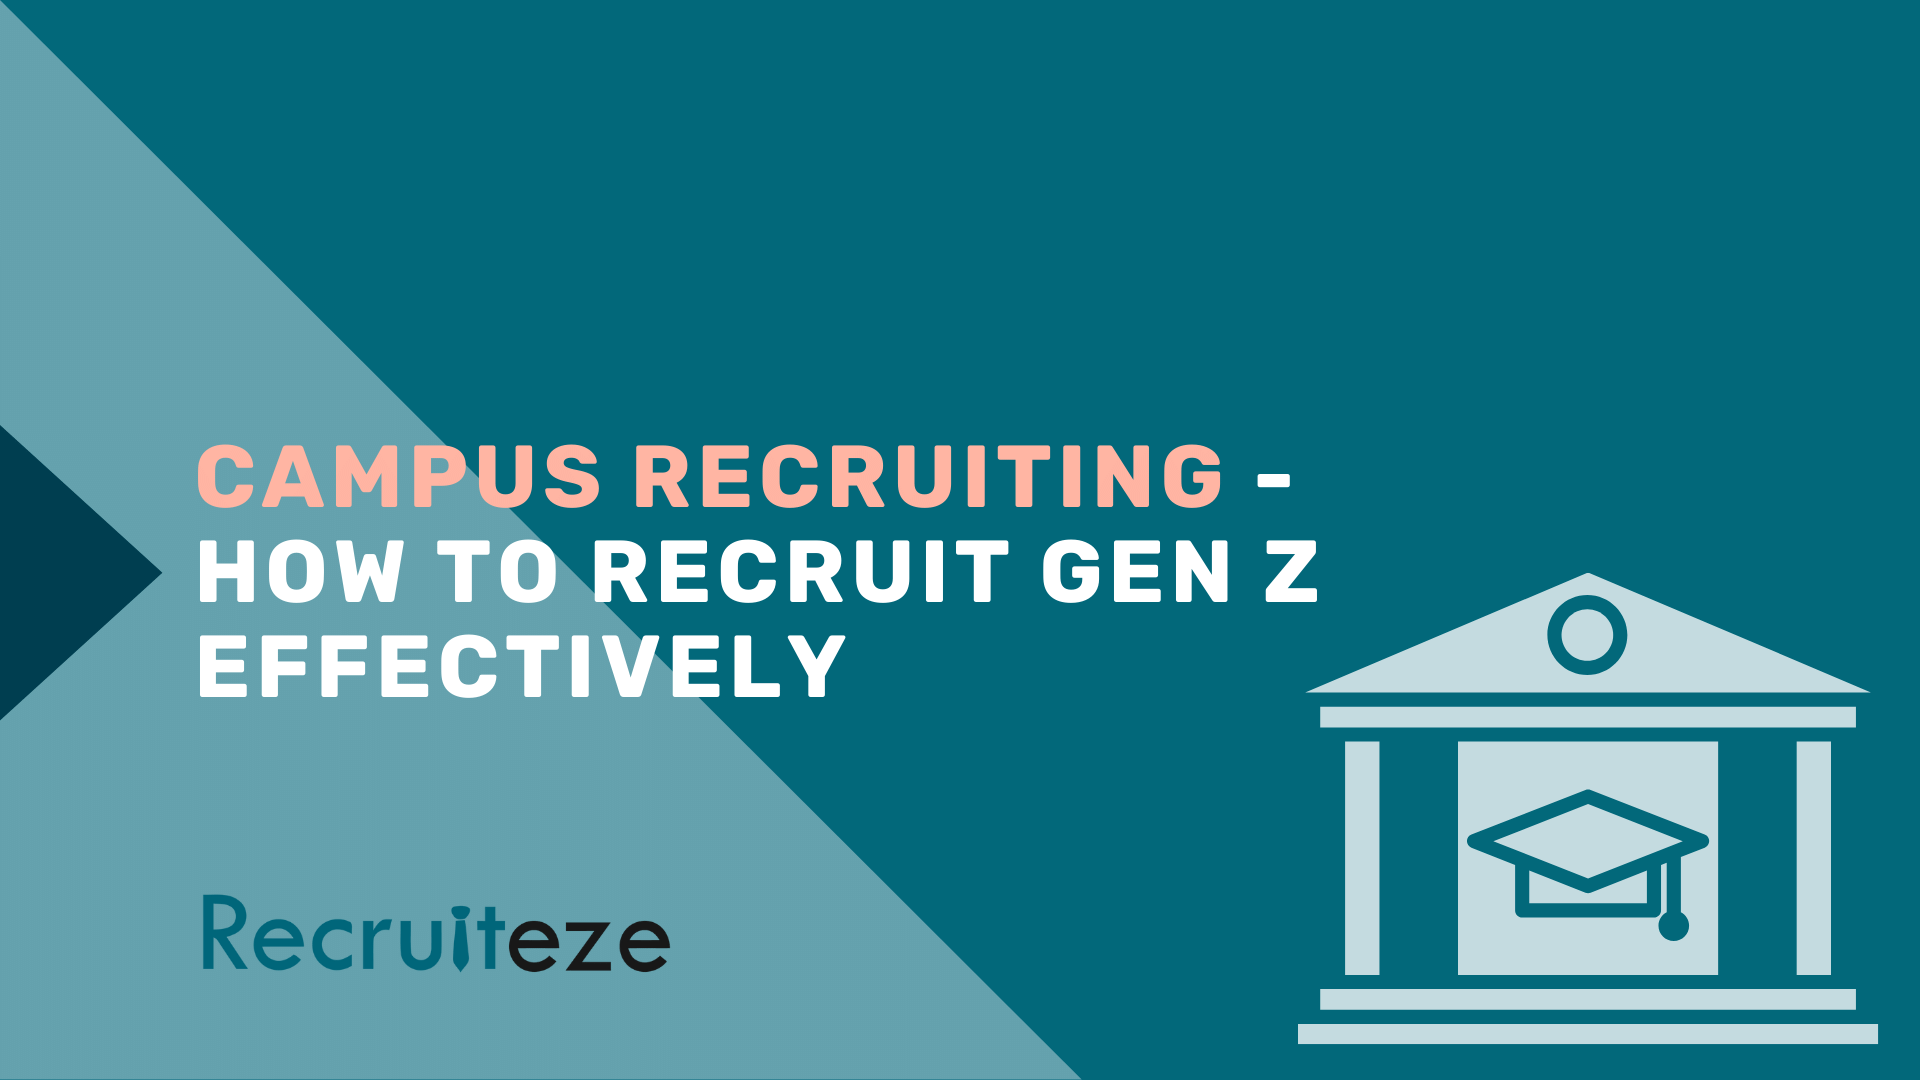 Campus Recruiting - How to Recruit Gen Z Effectively